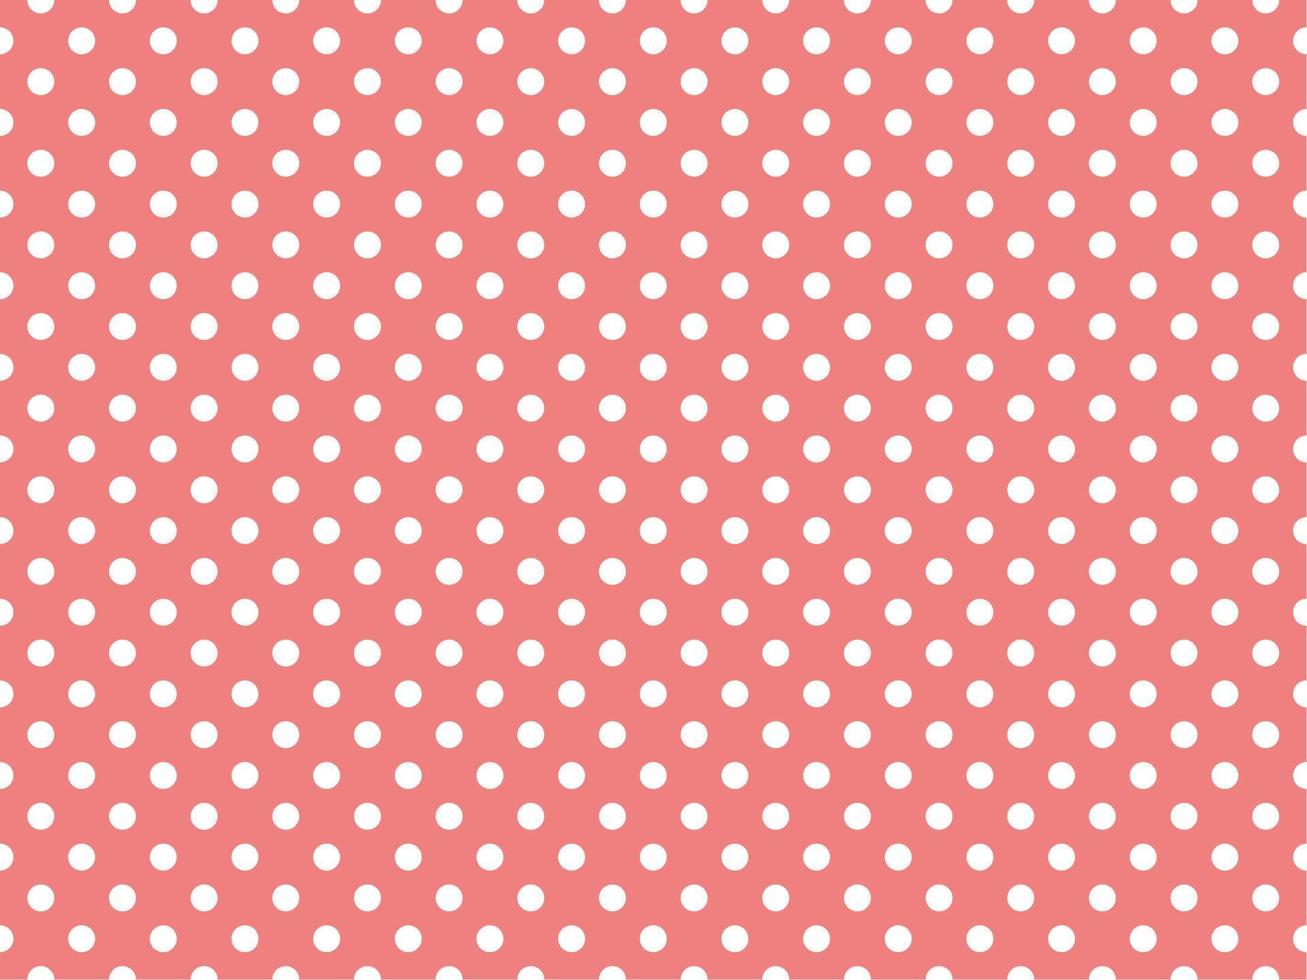 white polka dots over light coral background vector